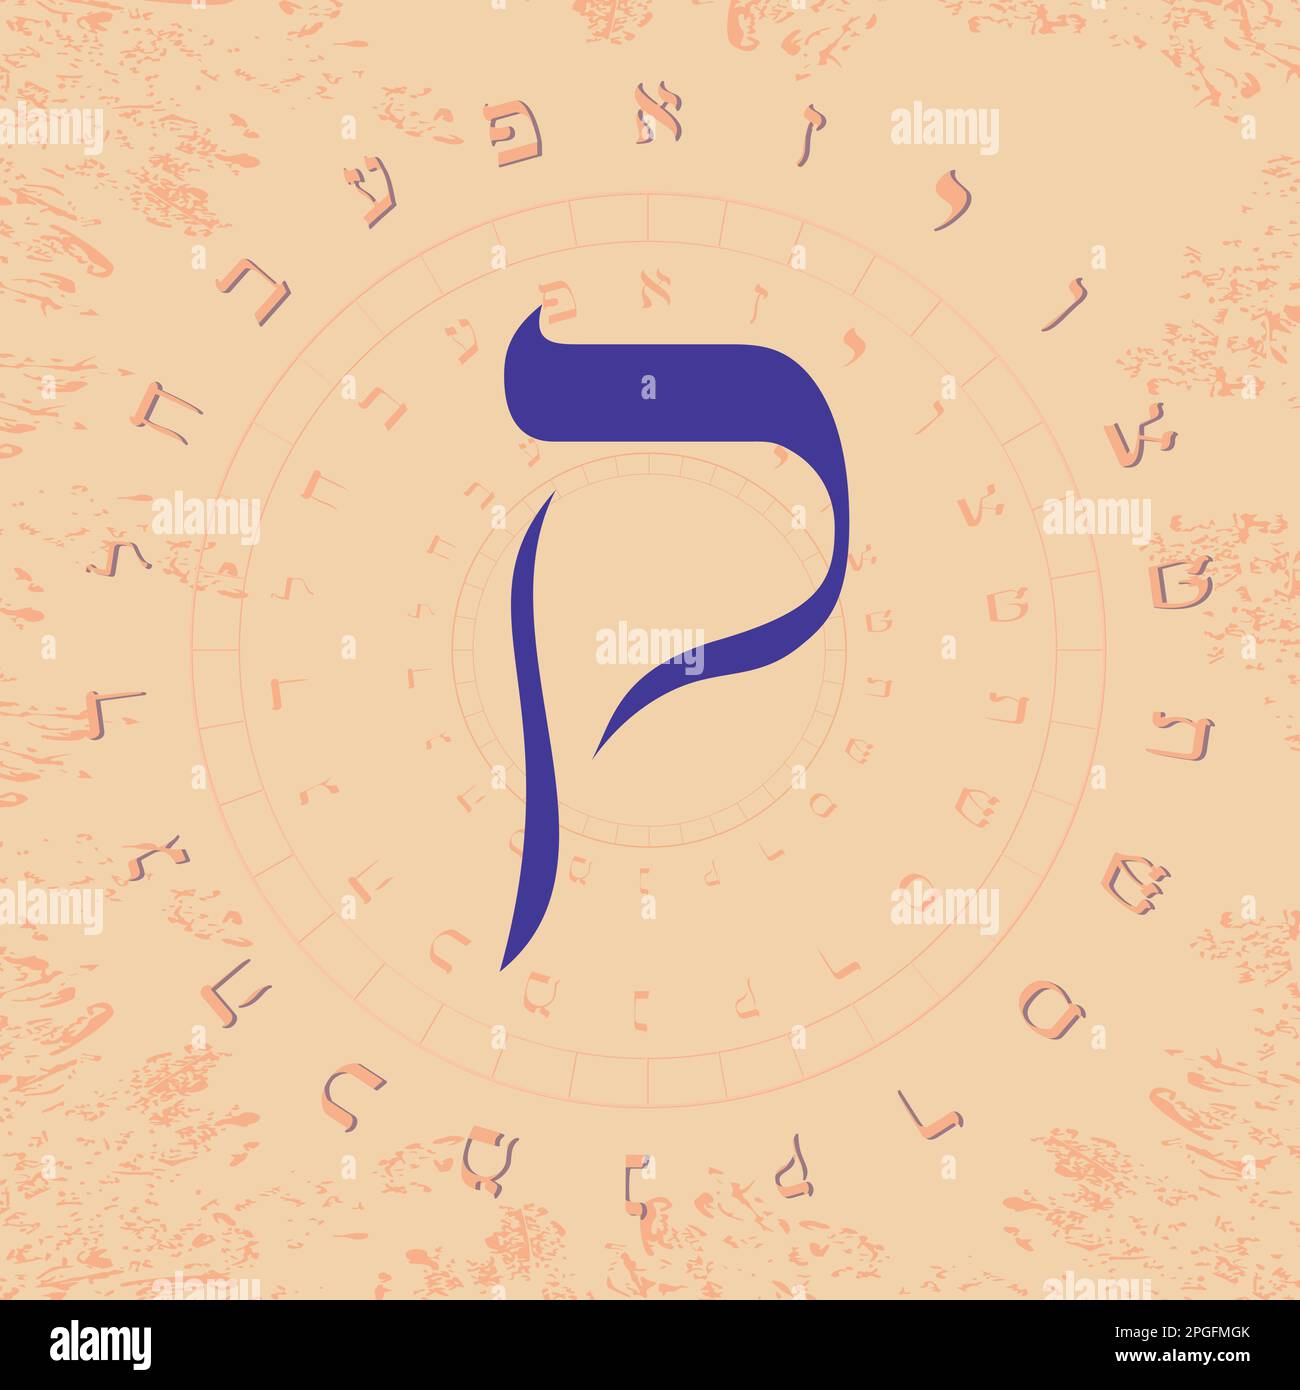 Vector illustration of the Hebrew alphabet in circular design. Large blue Hebrew letter called Qoph. Stock Vector